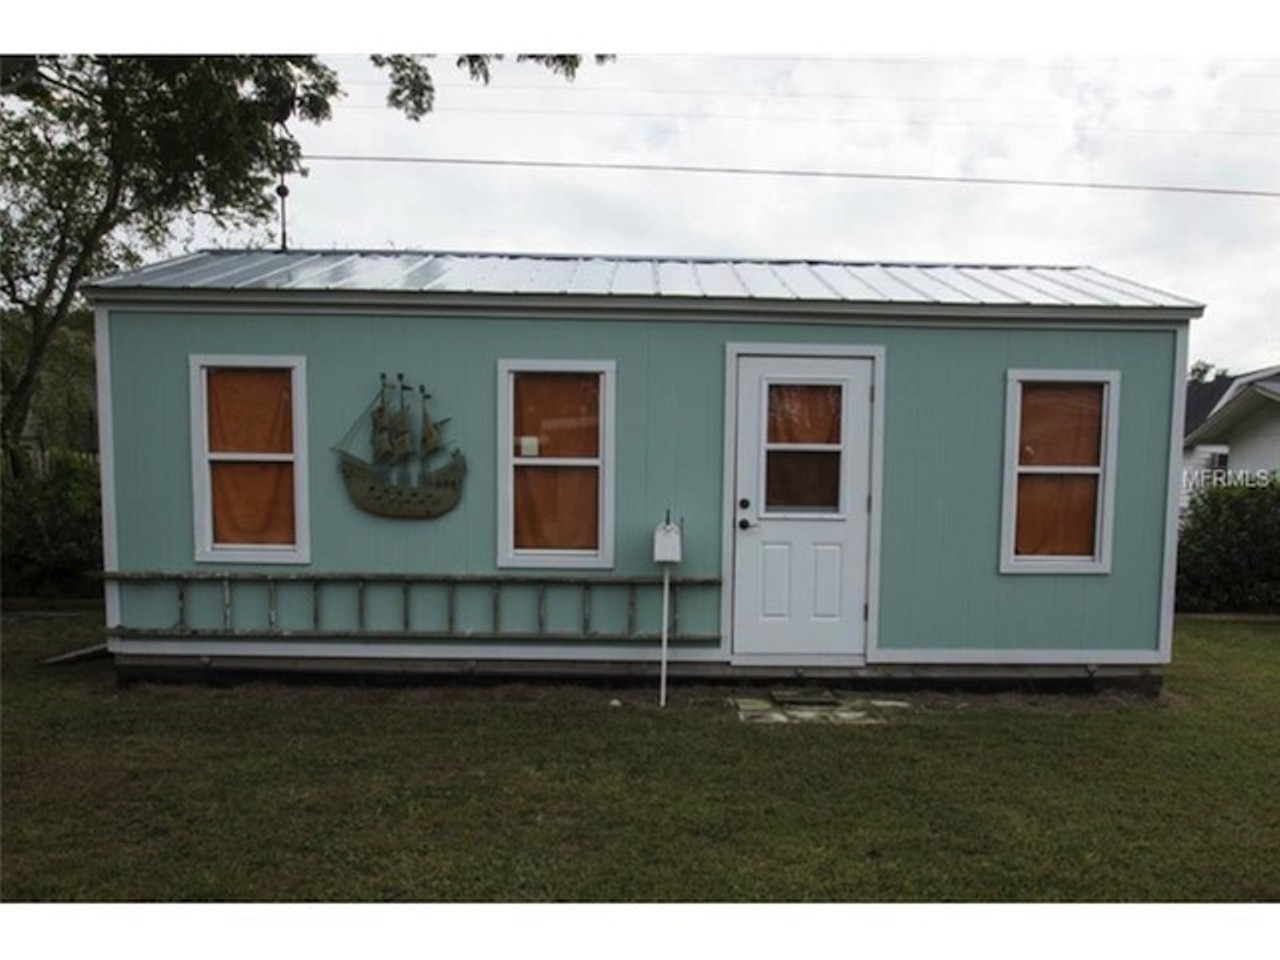 734 Carew Ave., Orlando, 32804Valued at: $175,000See more photos.